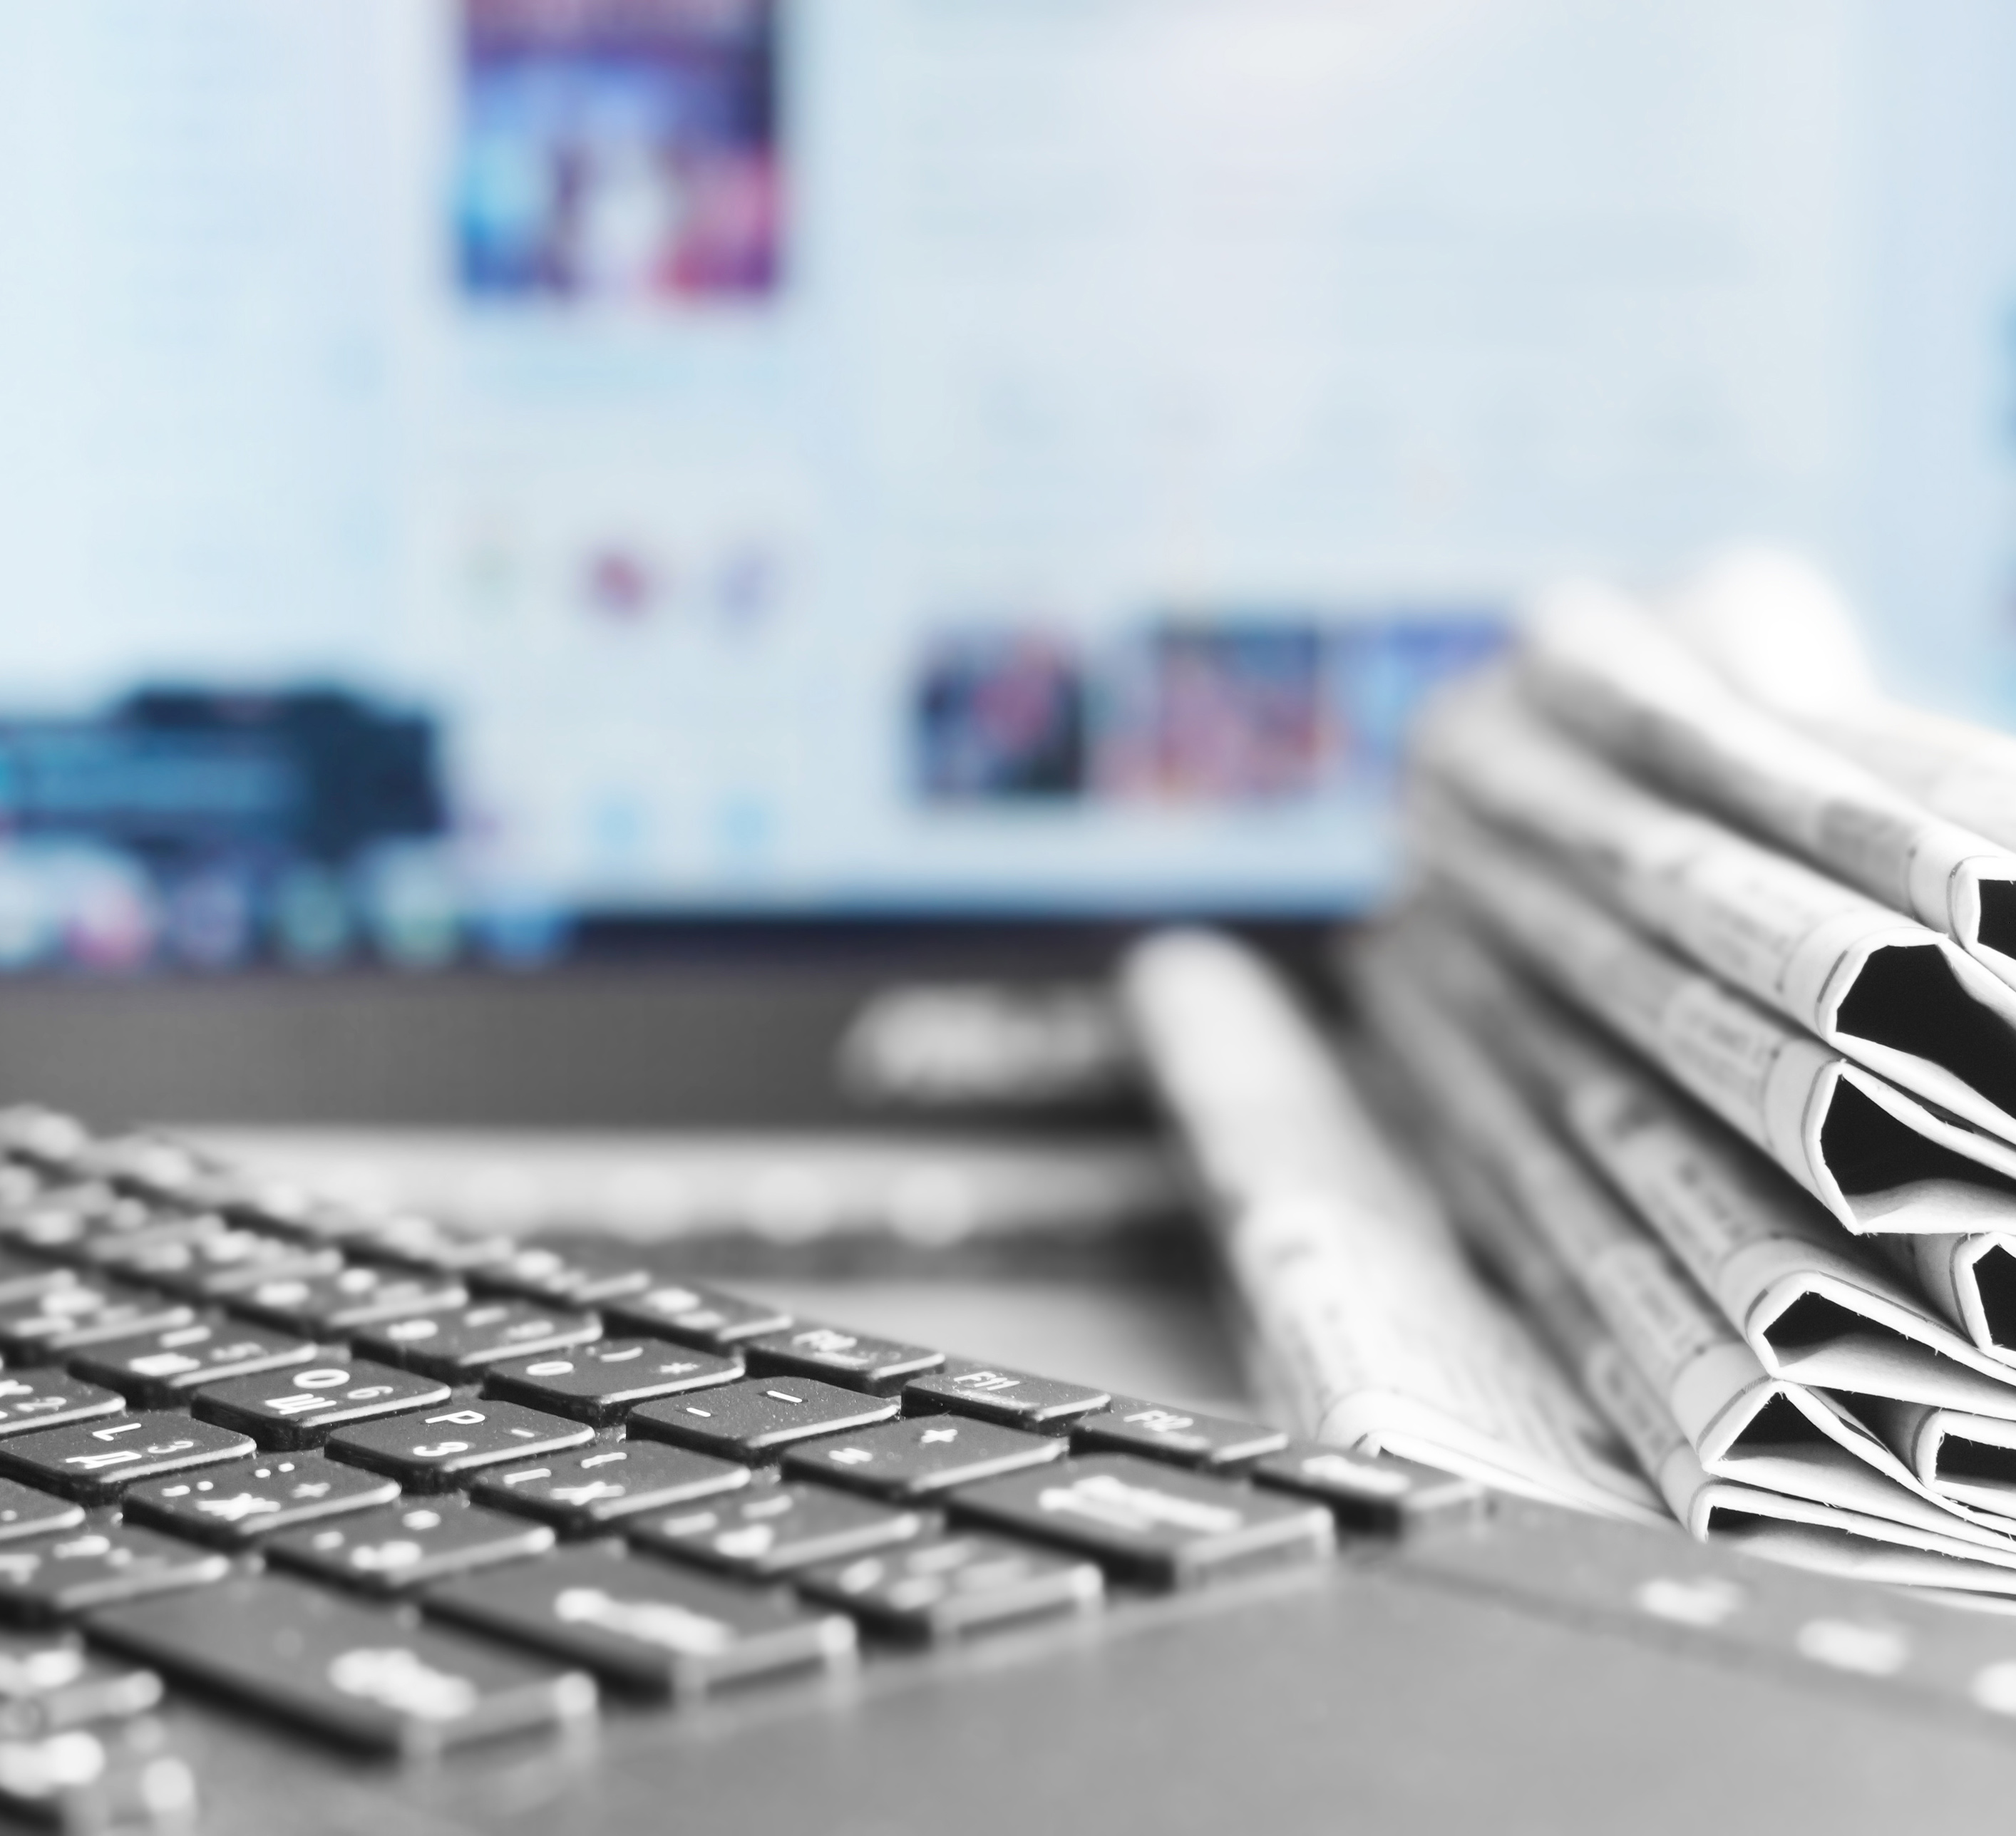 56% of respondents demonstrated a medium and low level of trust in the printed and online press reports during the Corona period